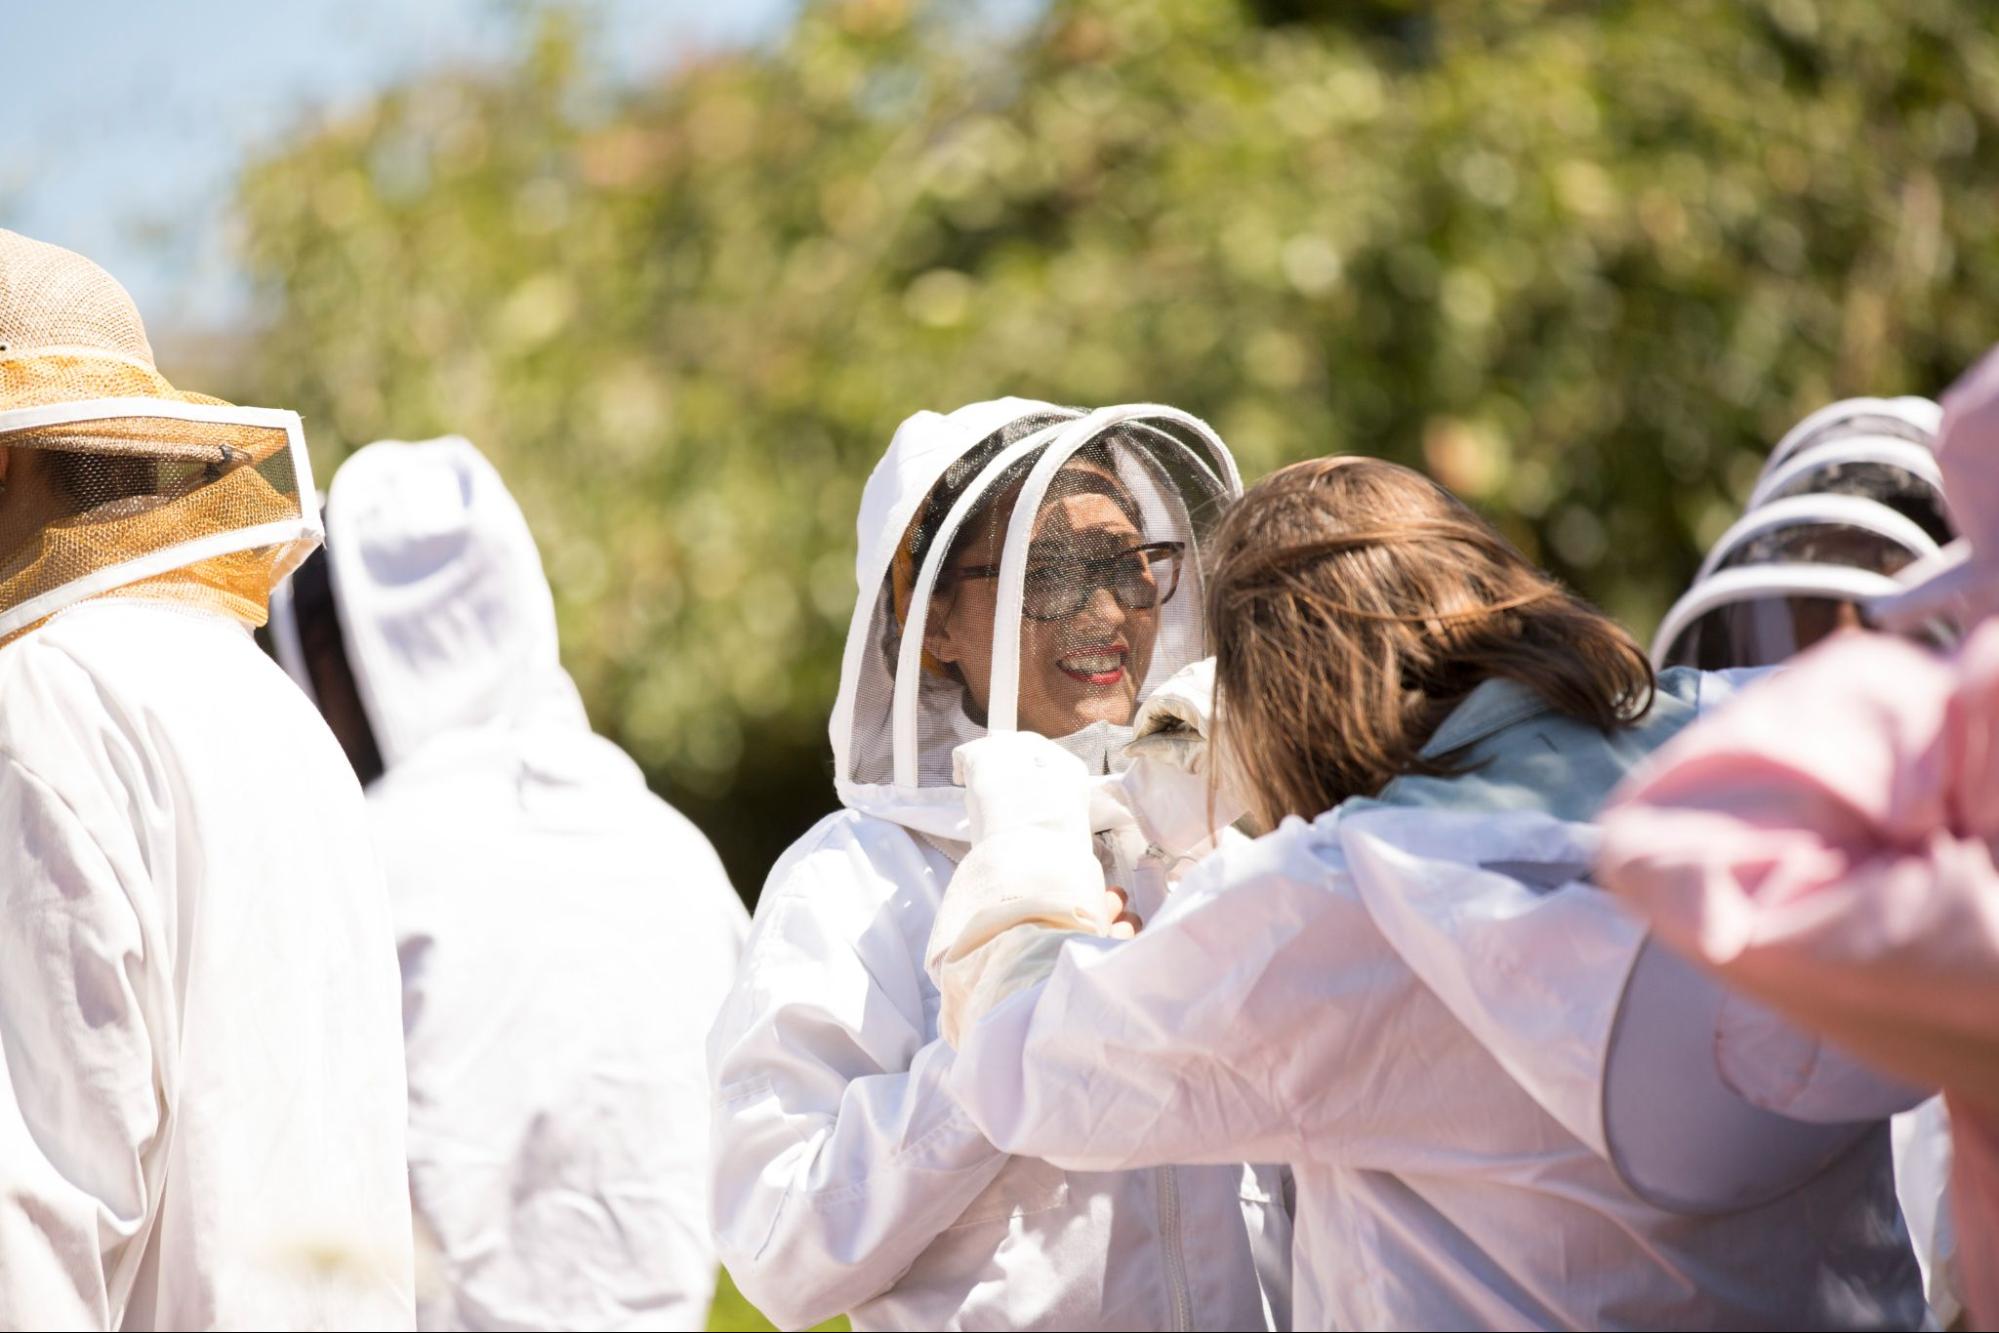 A guest is fitted with beekeepers mask at an Intro to Beekeeping event